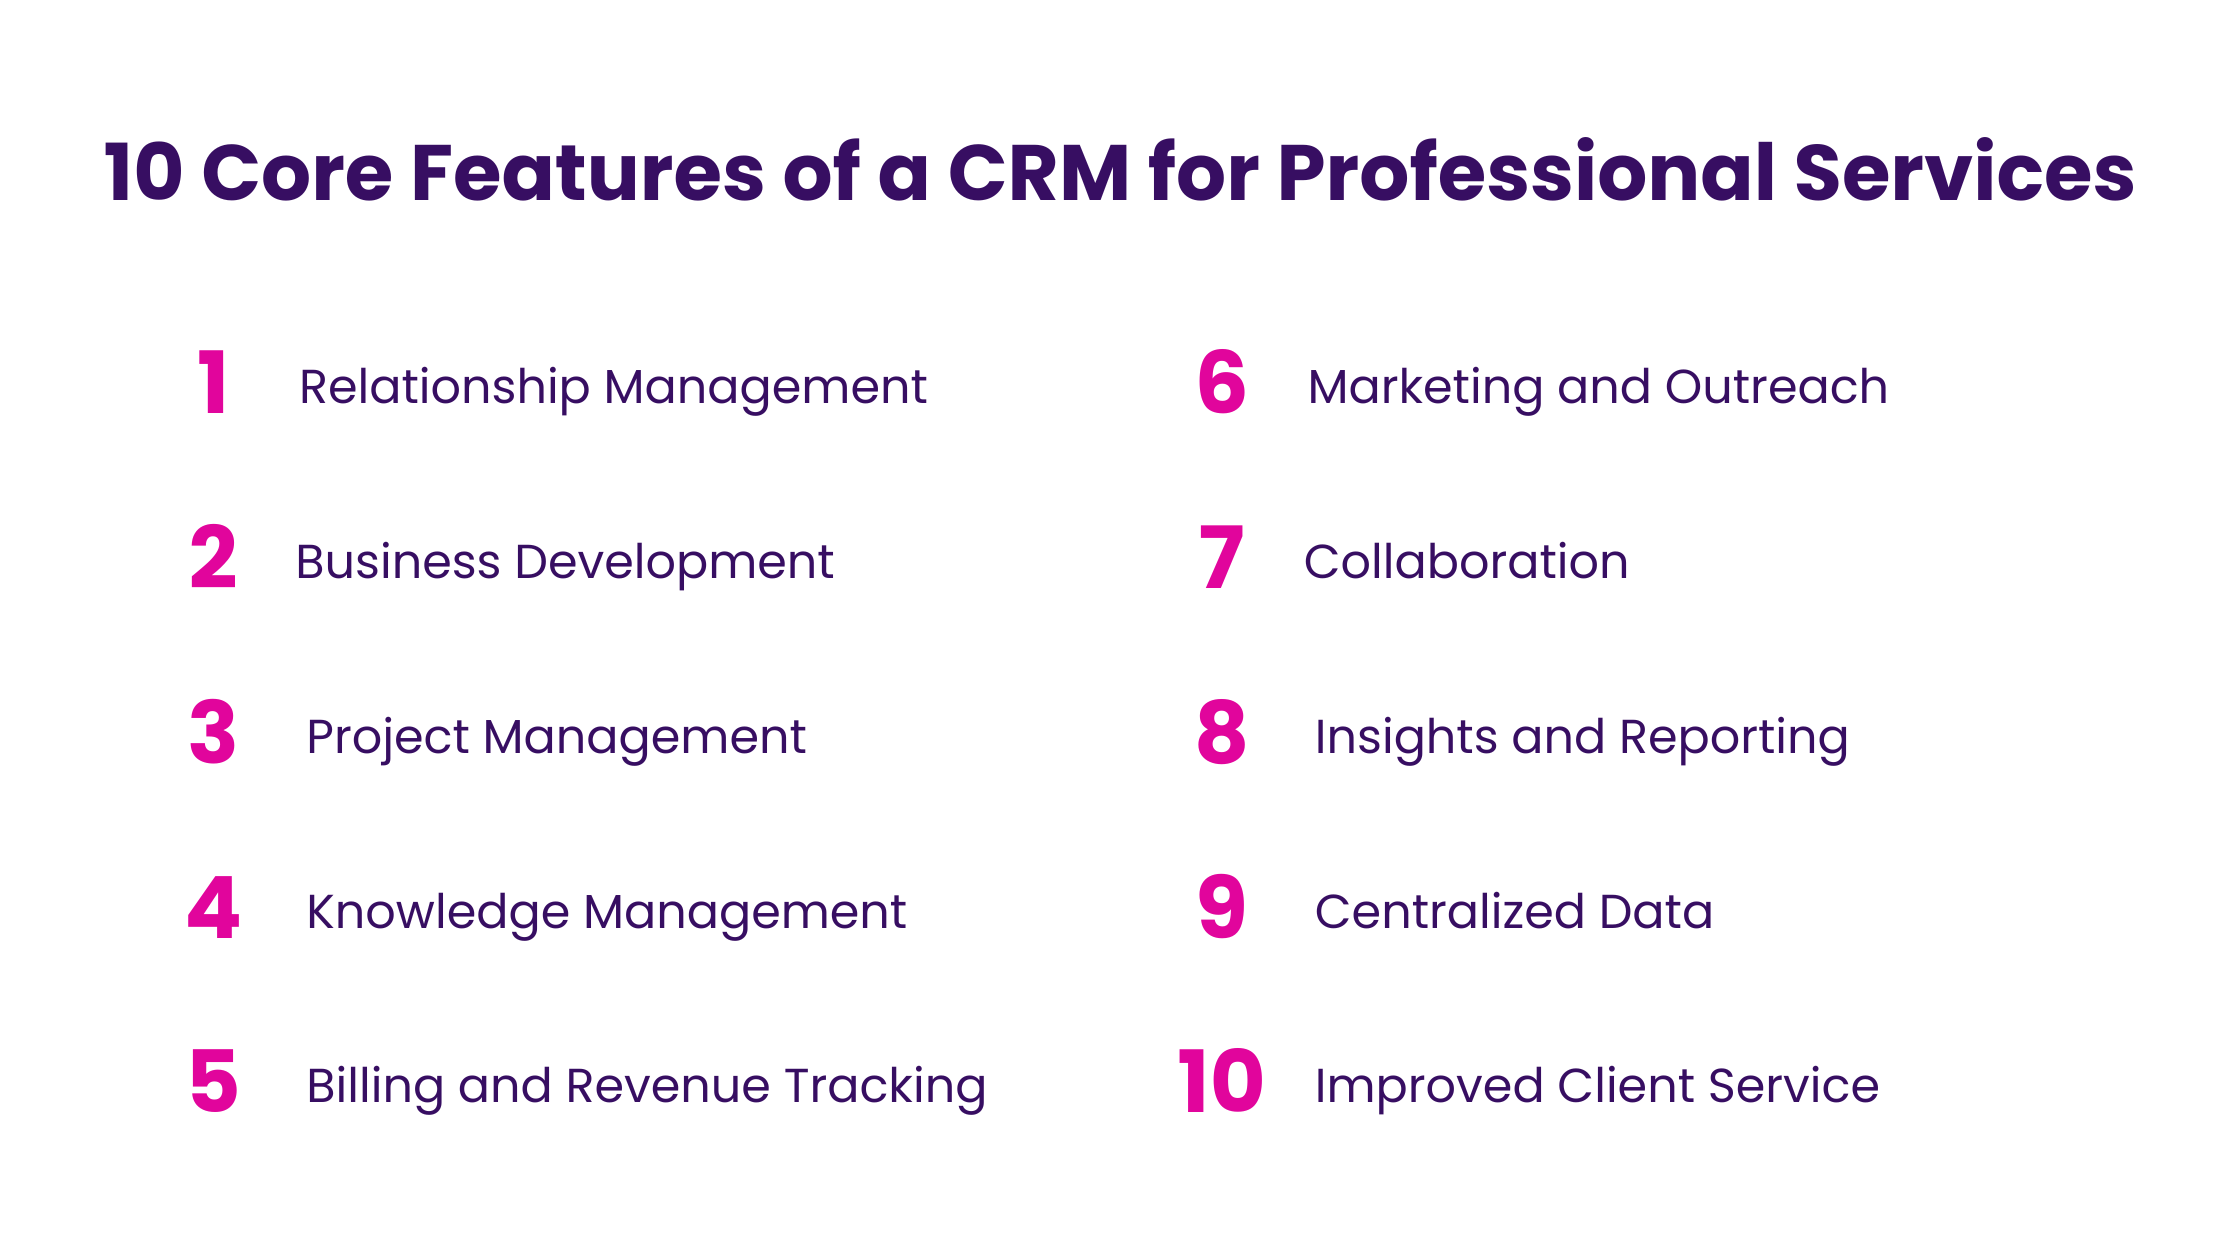 10 Core Features of a CRM for Professional Services